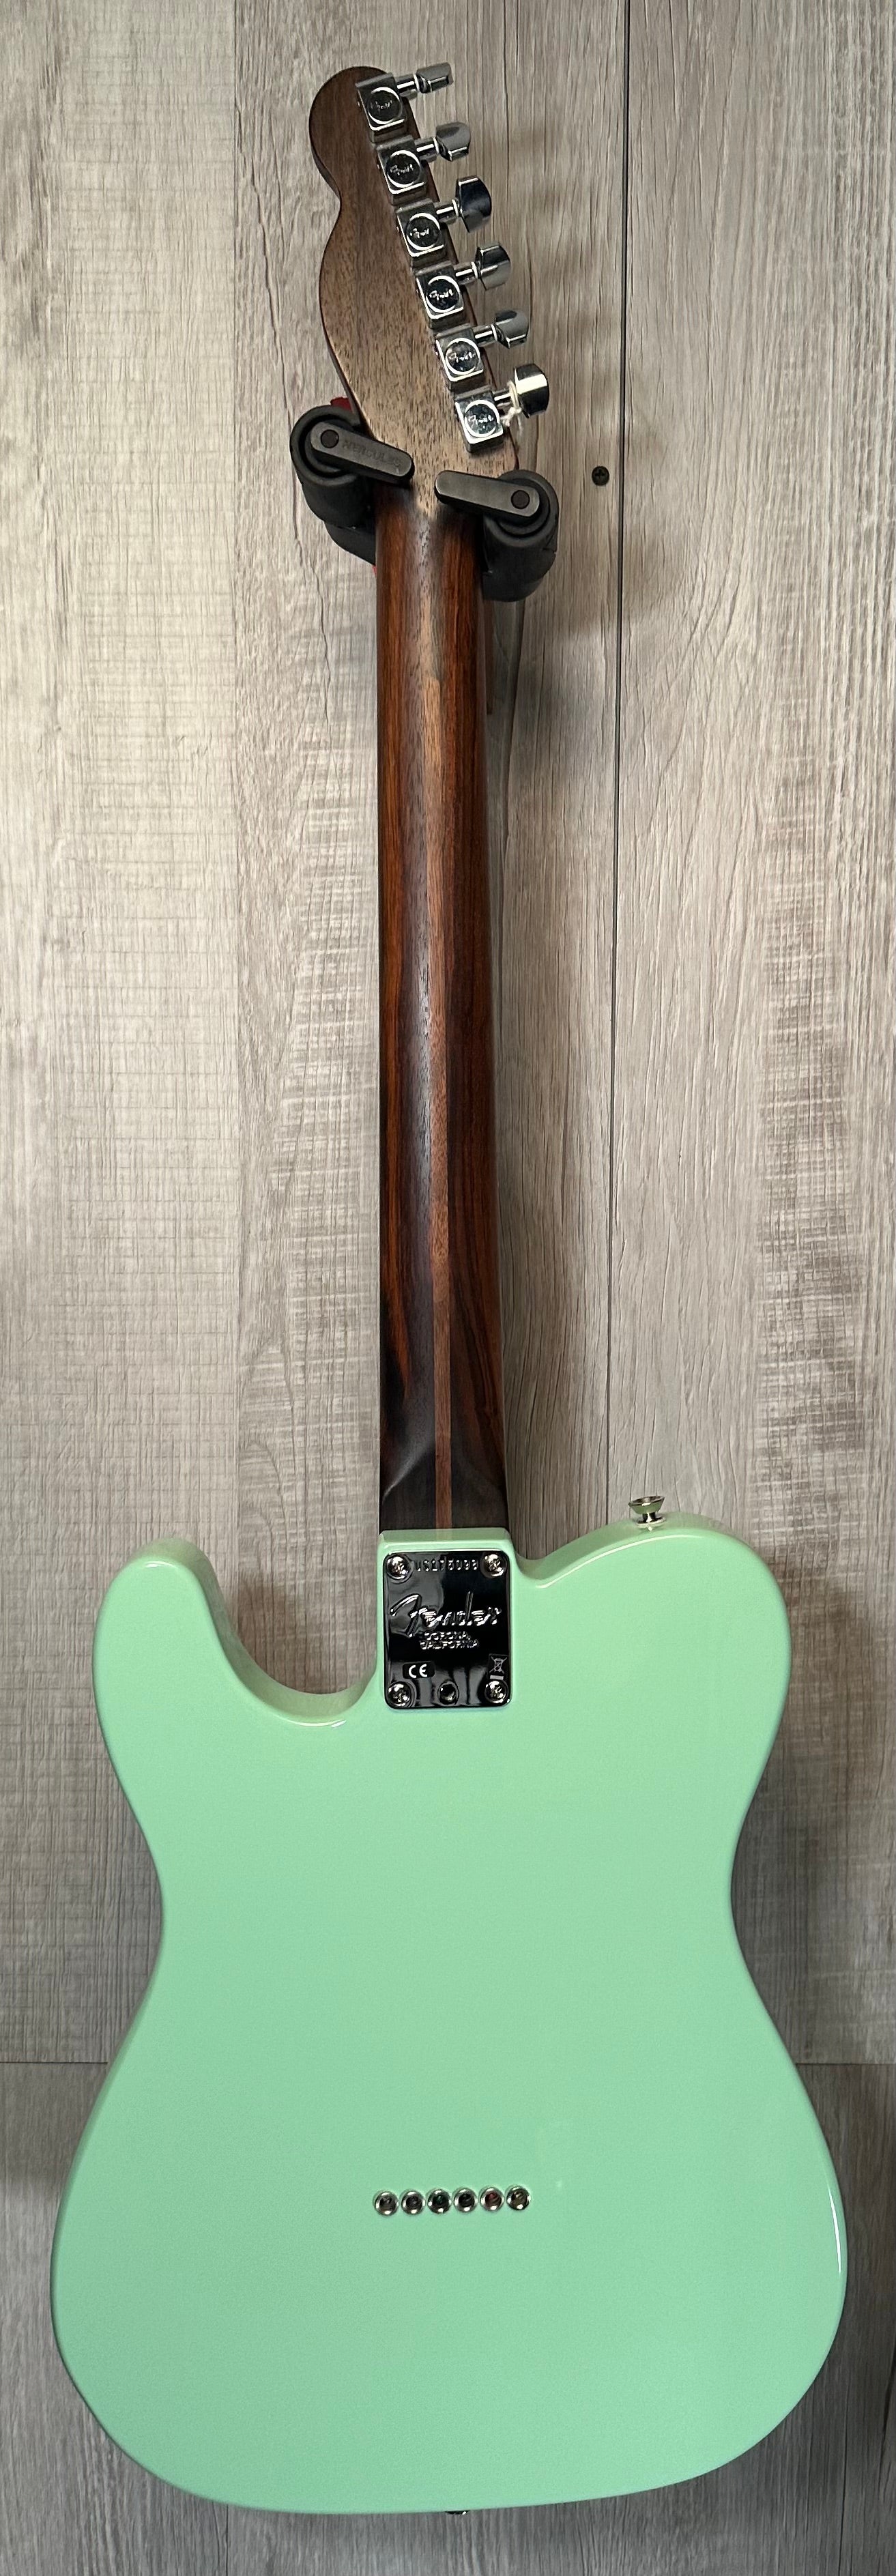 Full back of Used 2017 Fender Limited Edition American Professional Telecaster Rosewood Neck Sea Foam Green w/case TSS3930